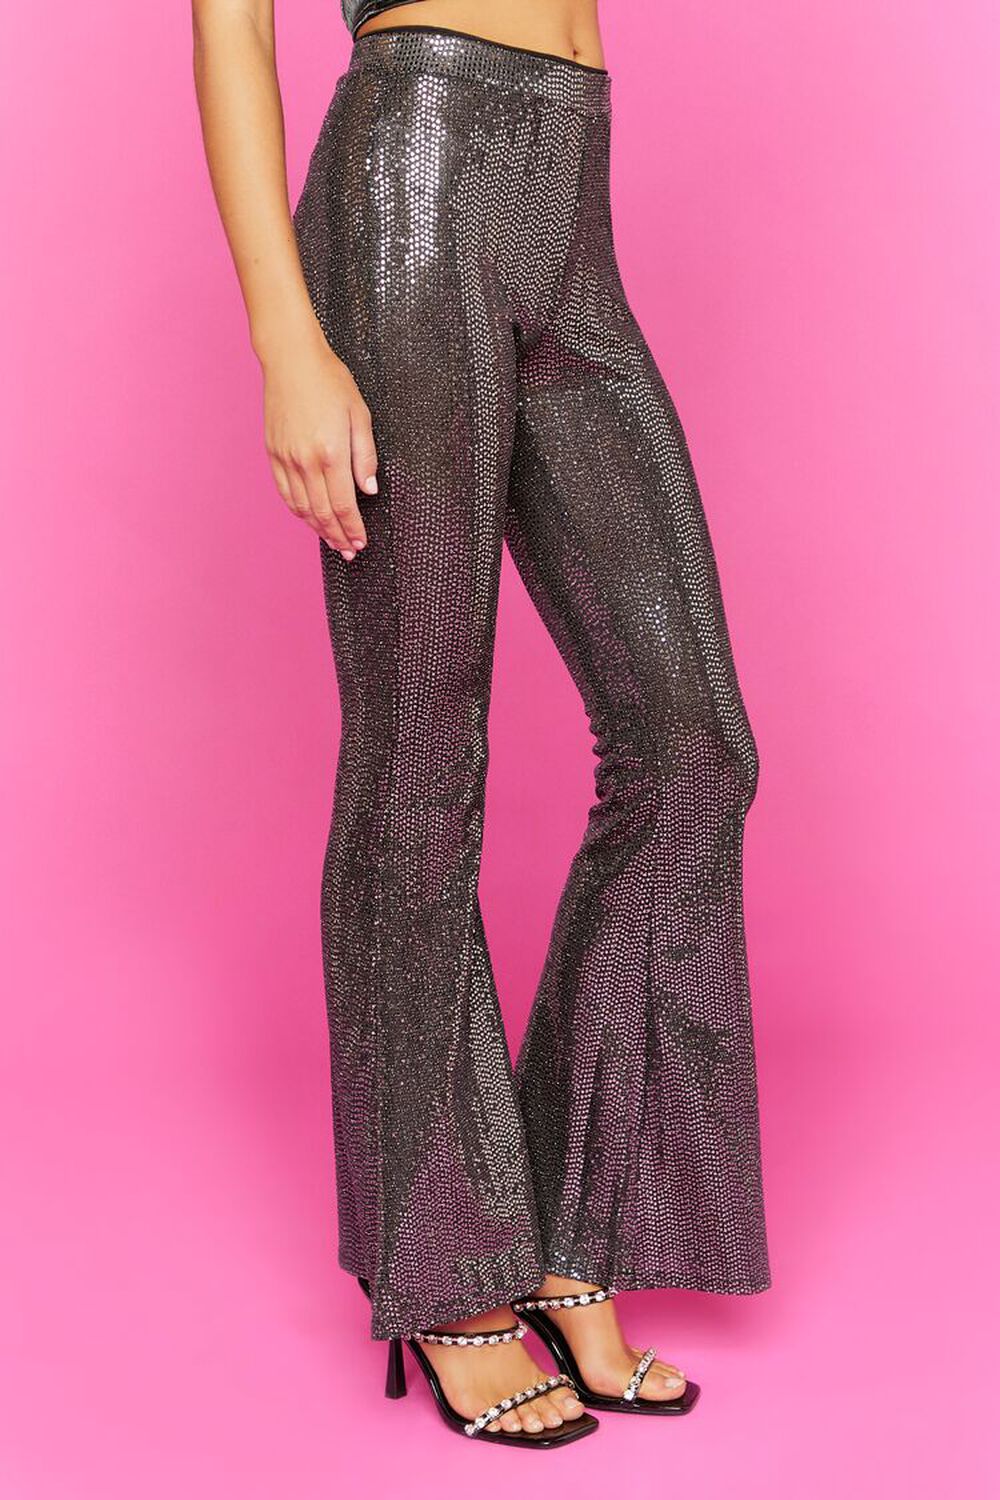 BLACK/SILVER Sequin Mid-Rise Flare Pants, image 3